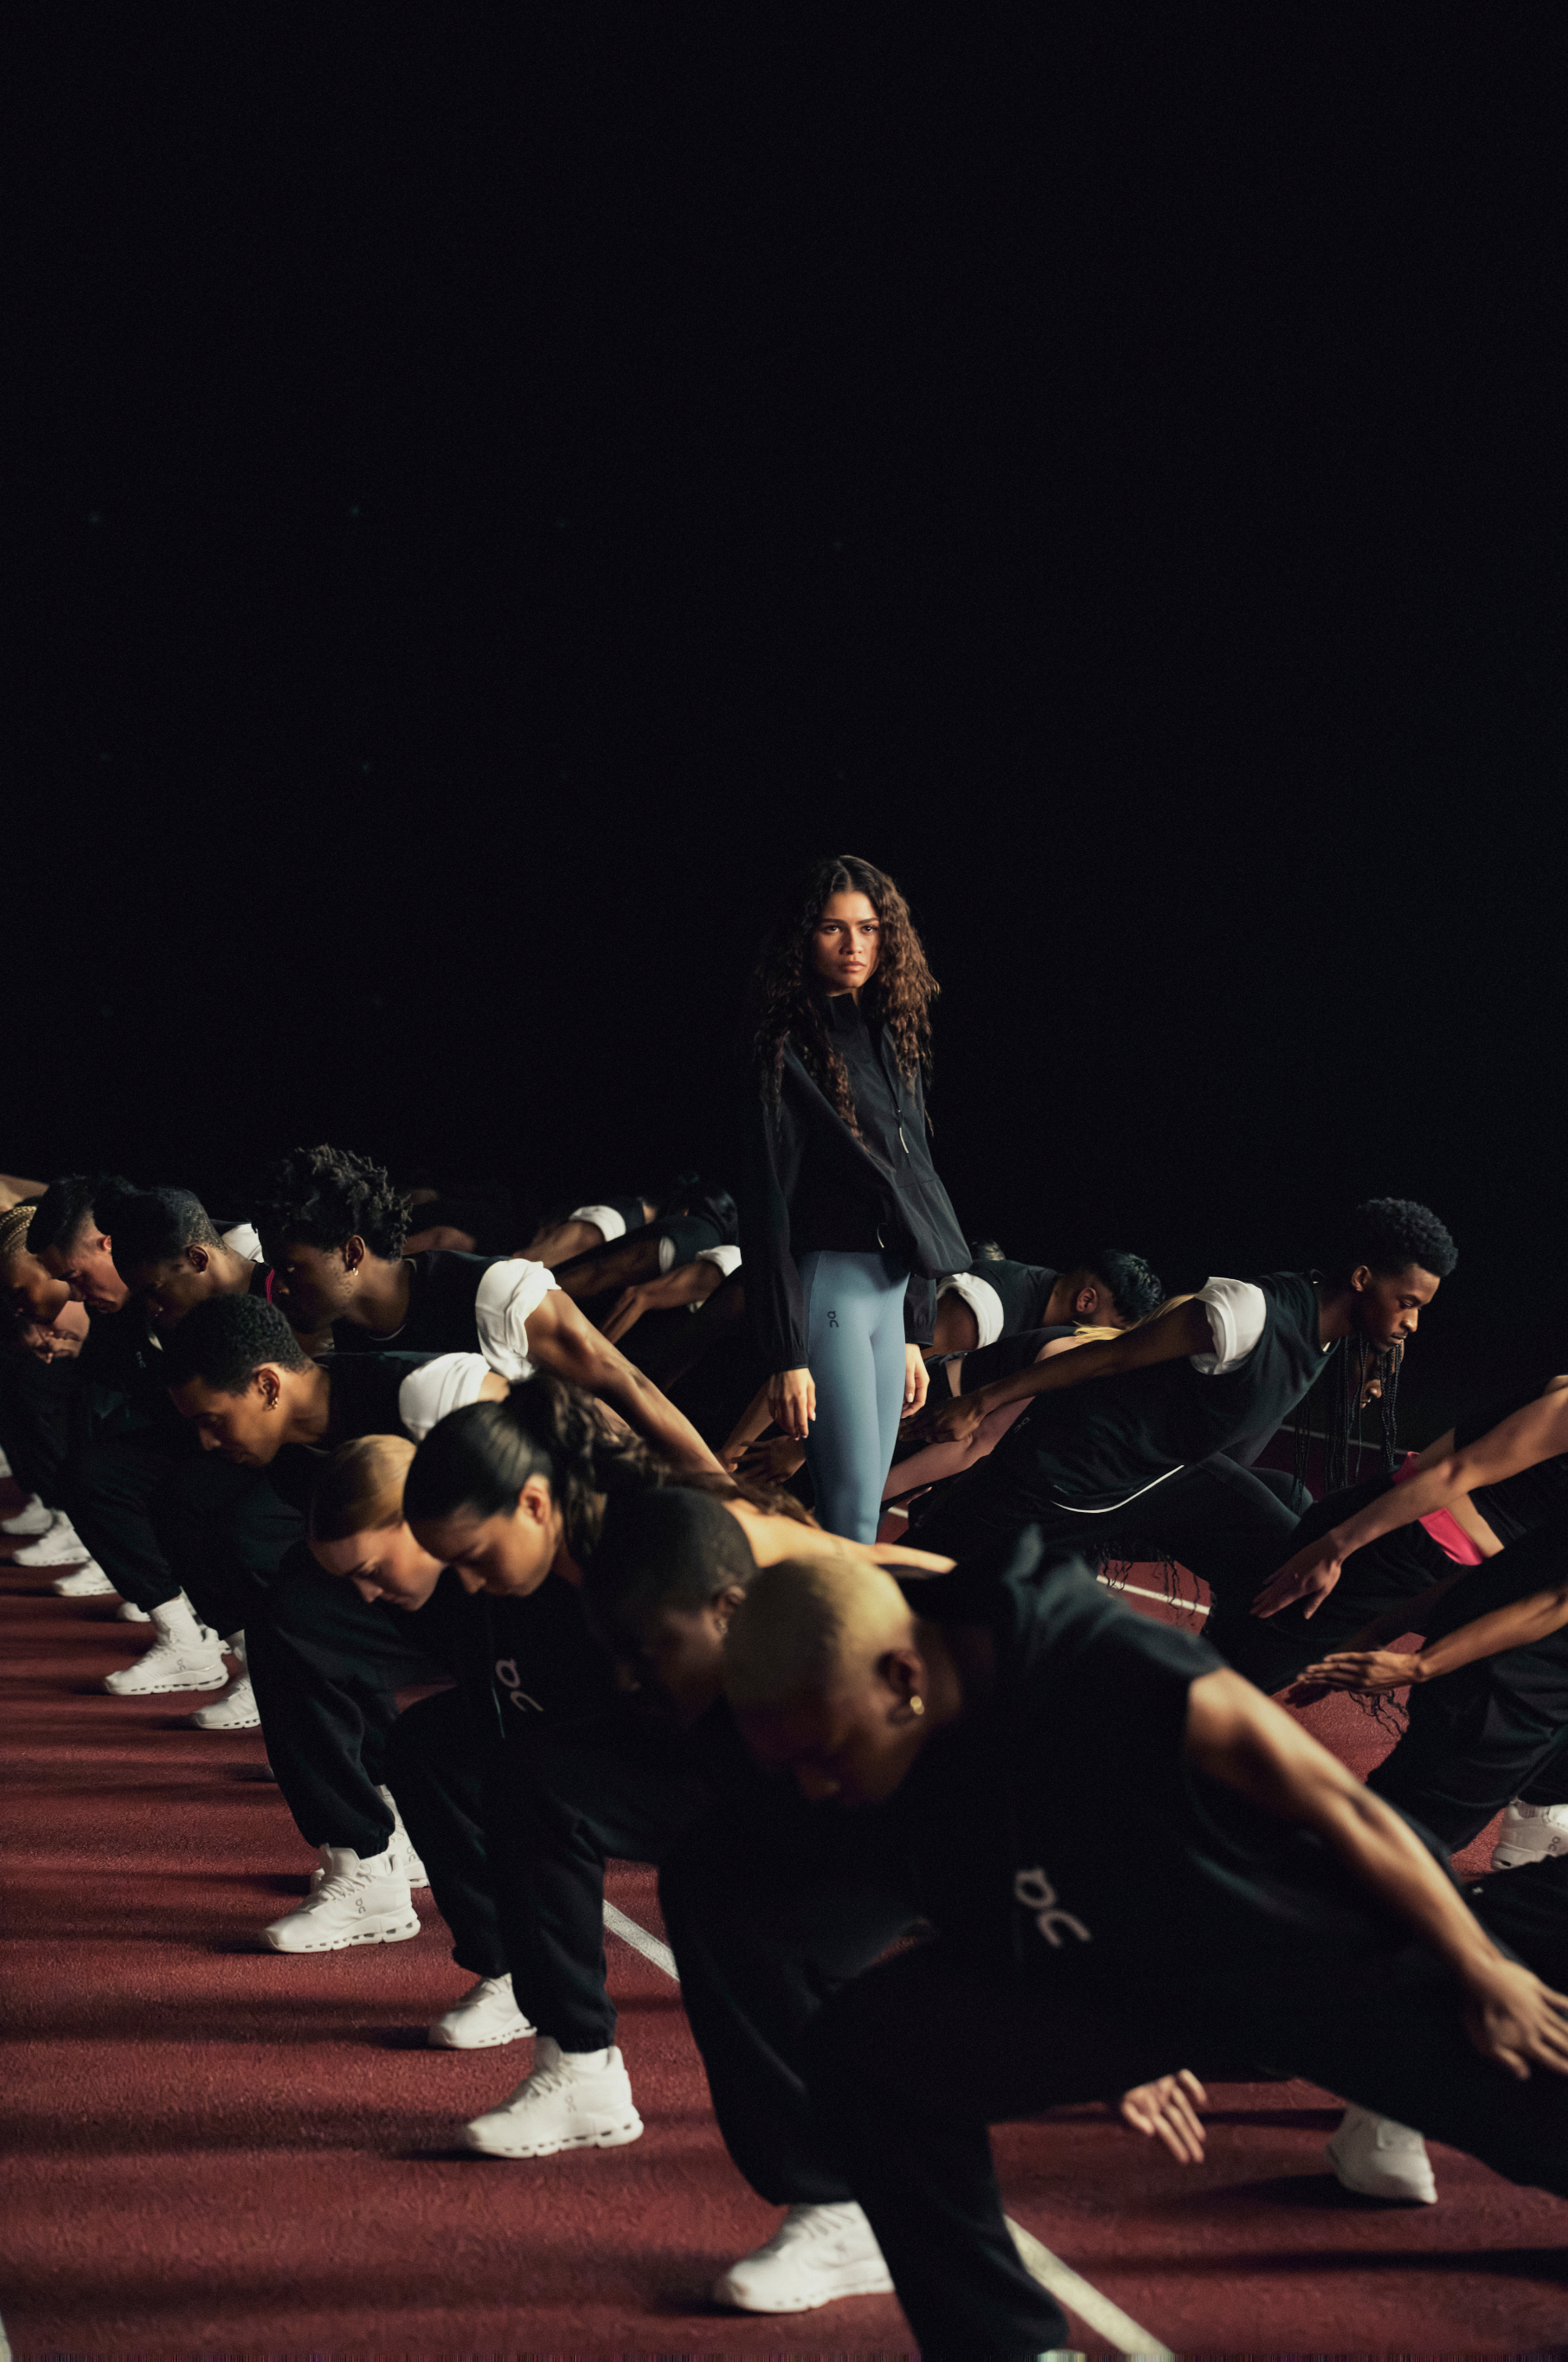 Zendaya stands in the center while a group of dancers in black and white athletic wear perform synchronized moves on either side